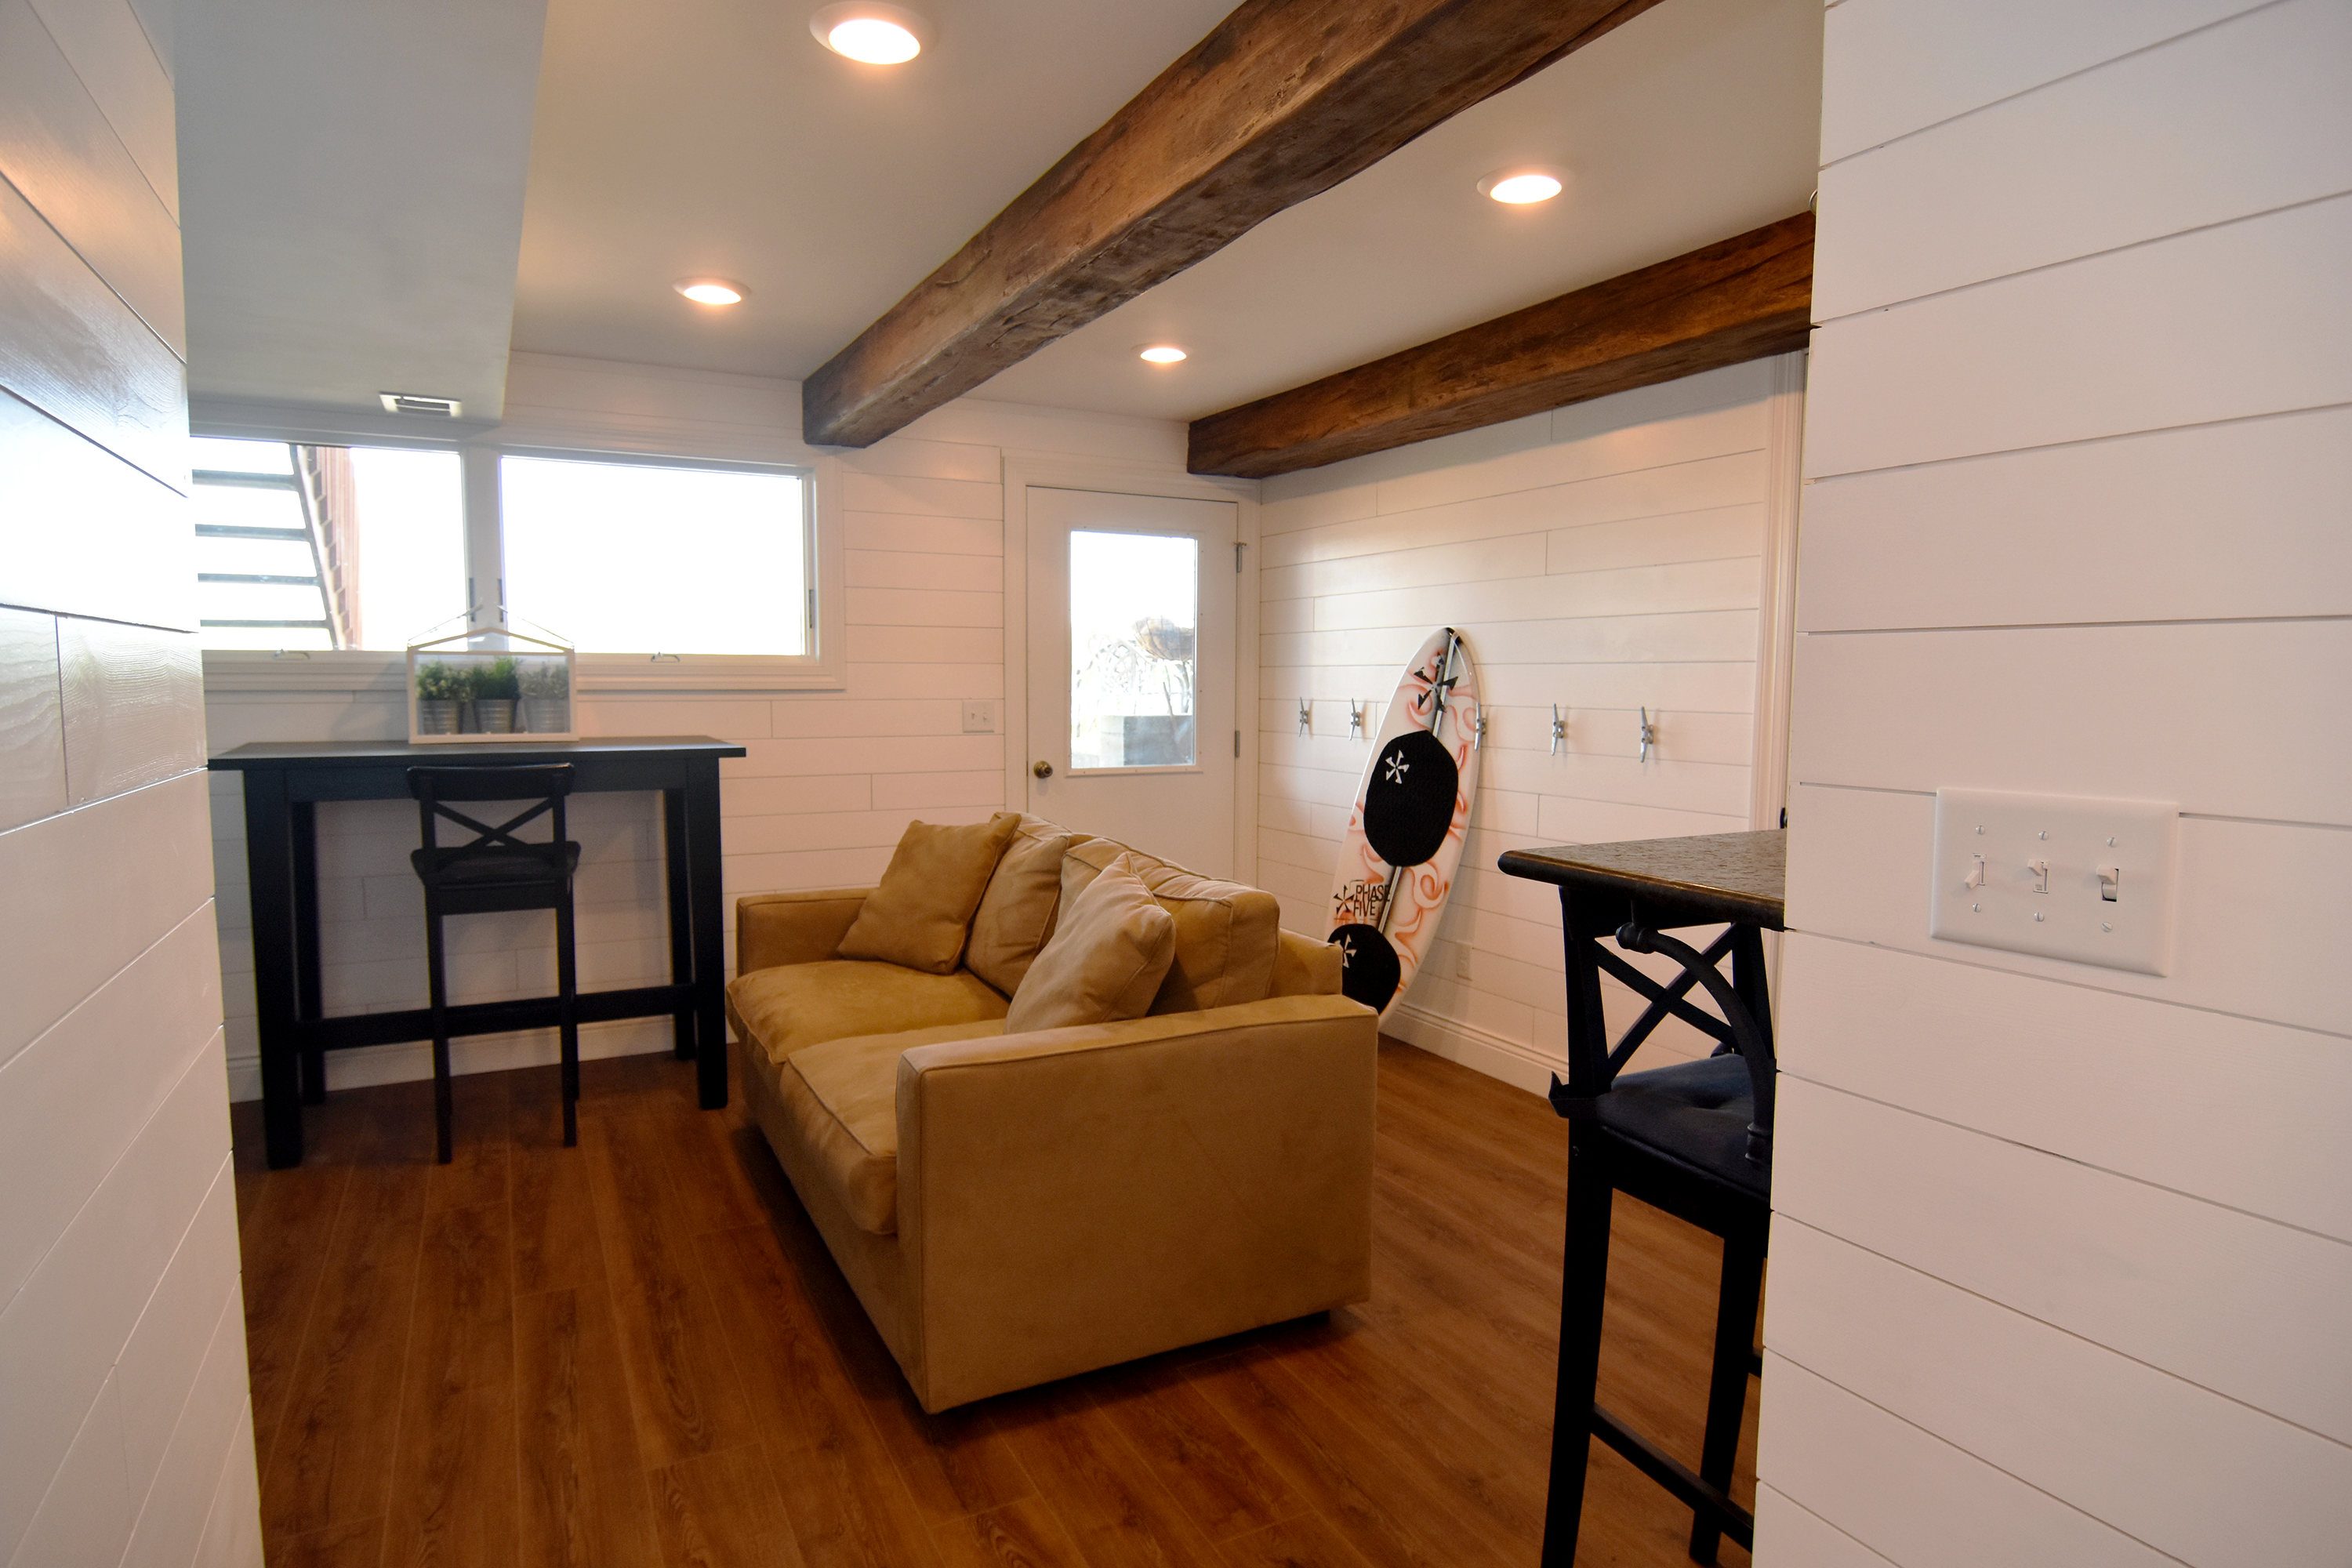 Cozy Basement - Hangout Space - View of couch and hightop tables on hardwood floors